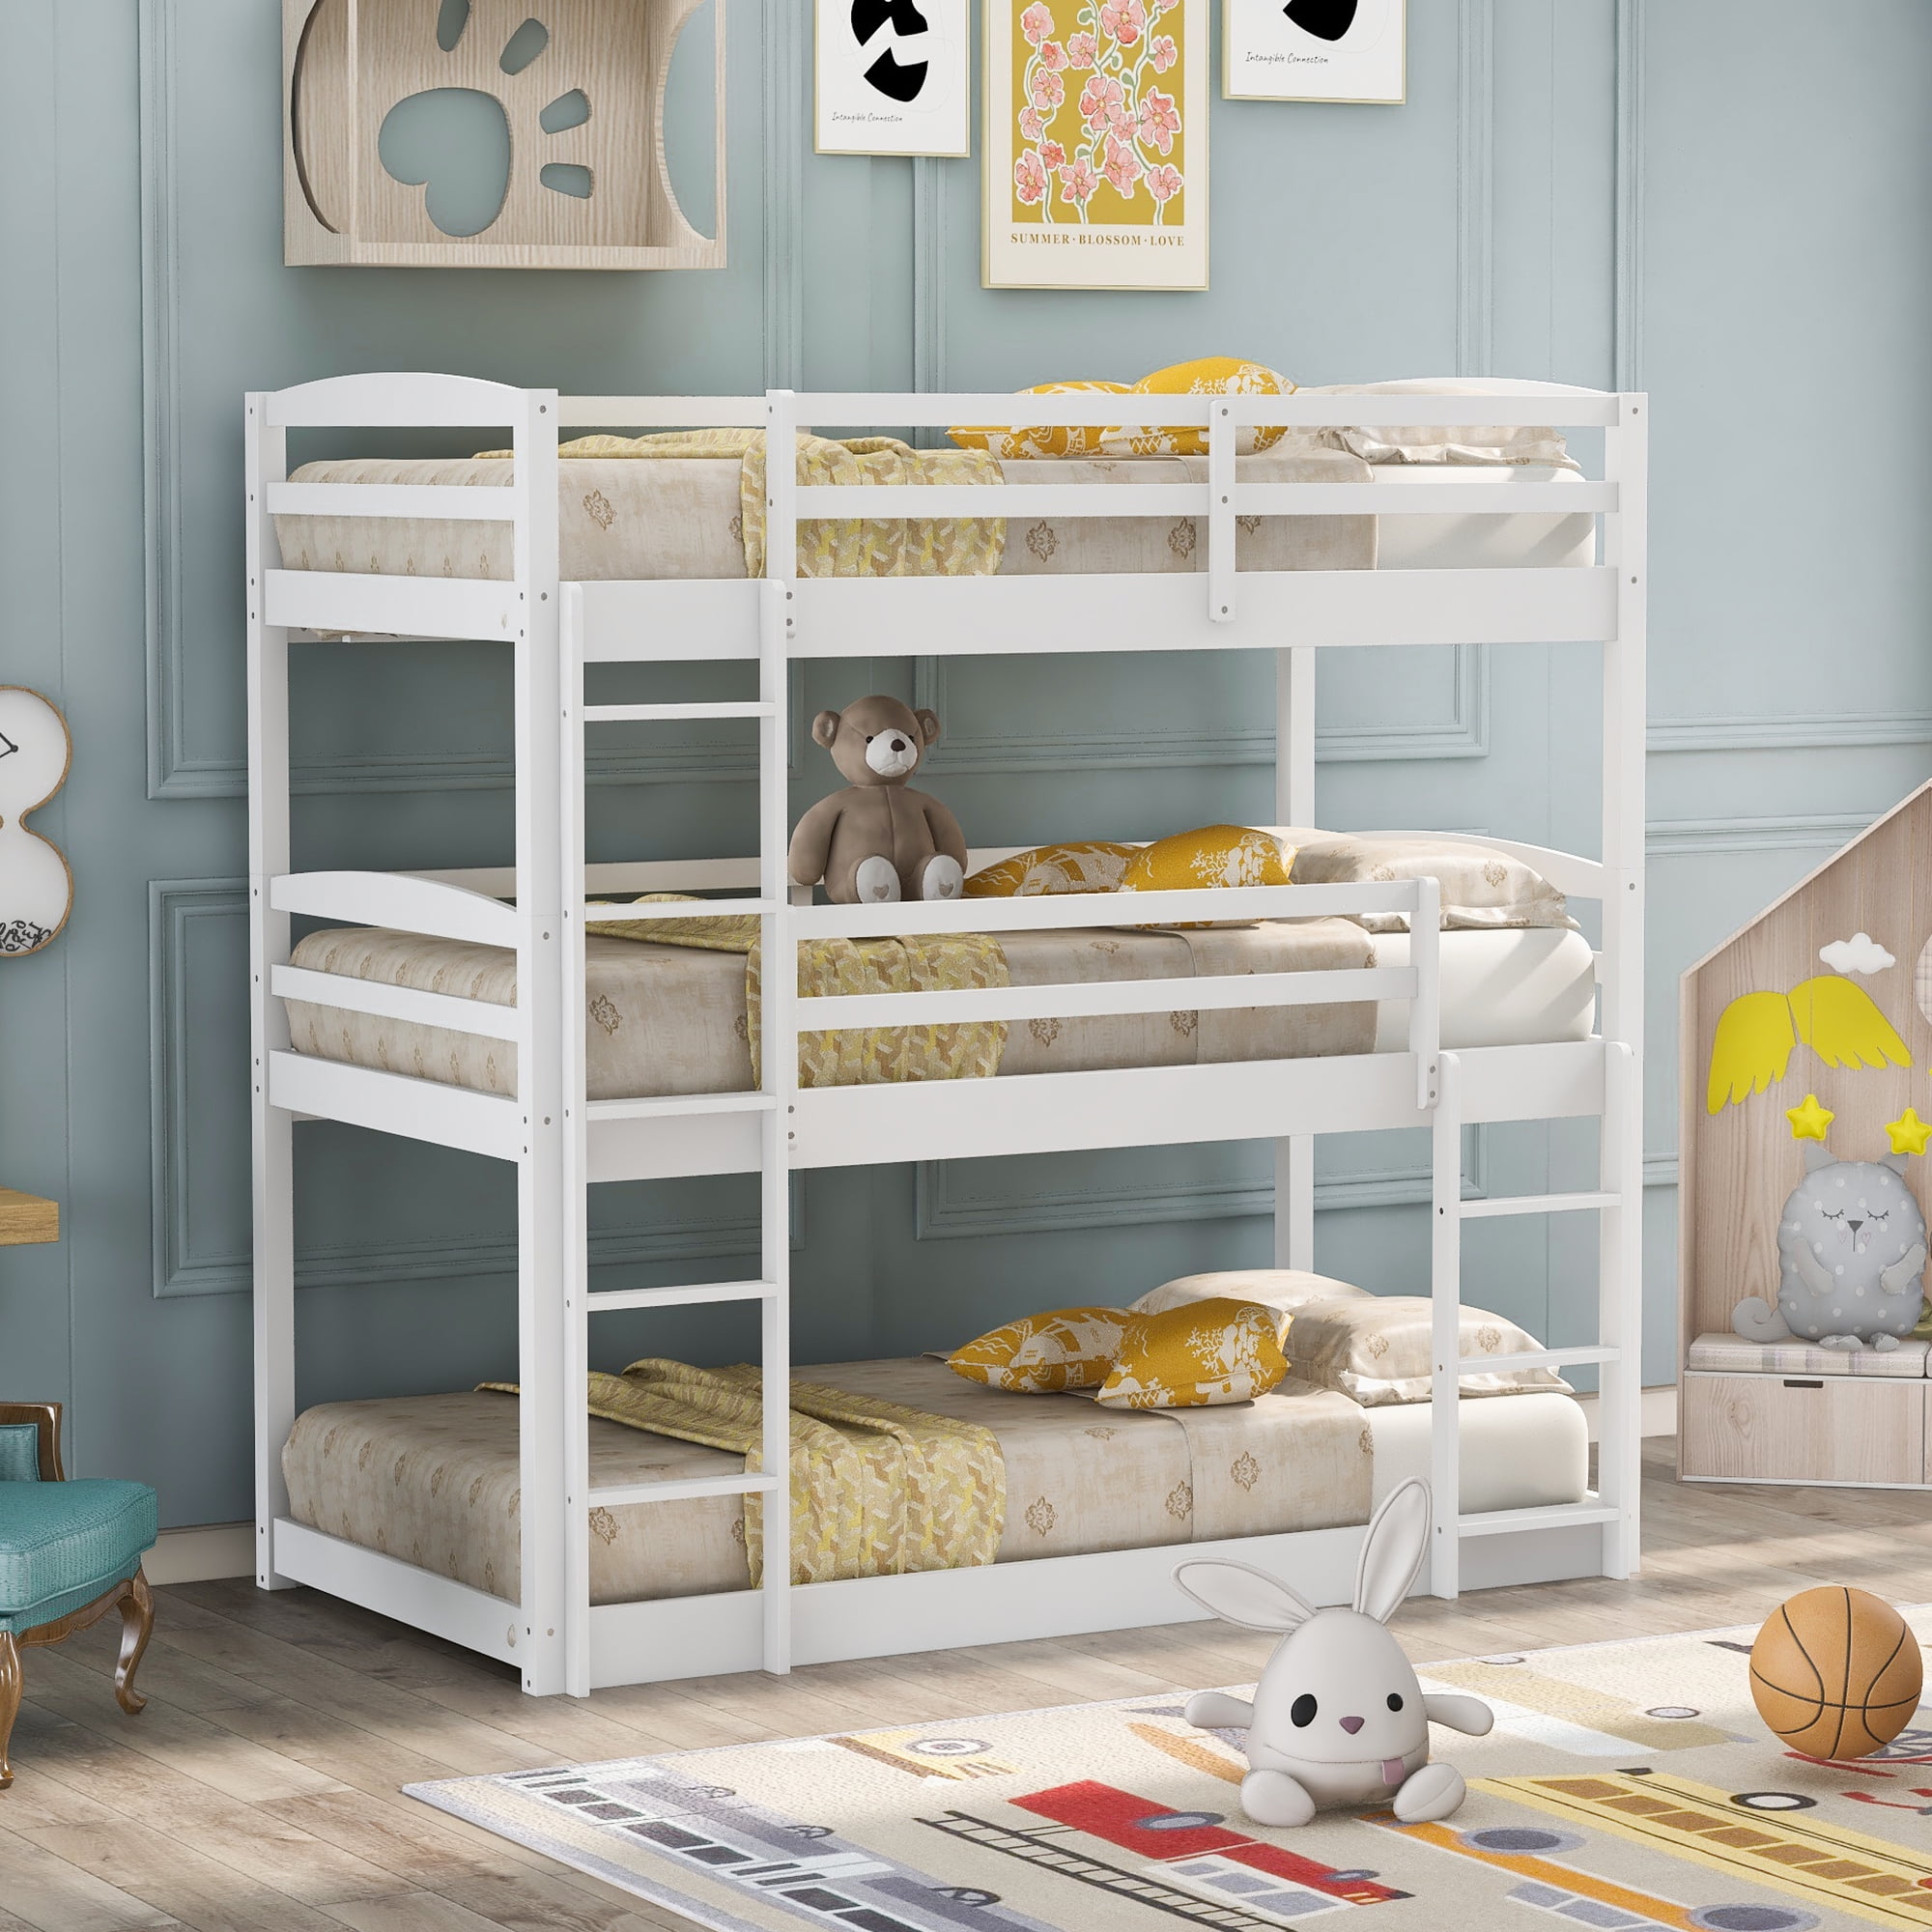 Twin Over Triple Bunk, Old Bunk Beds White